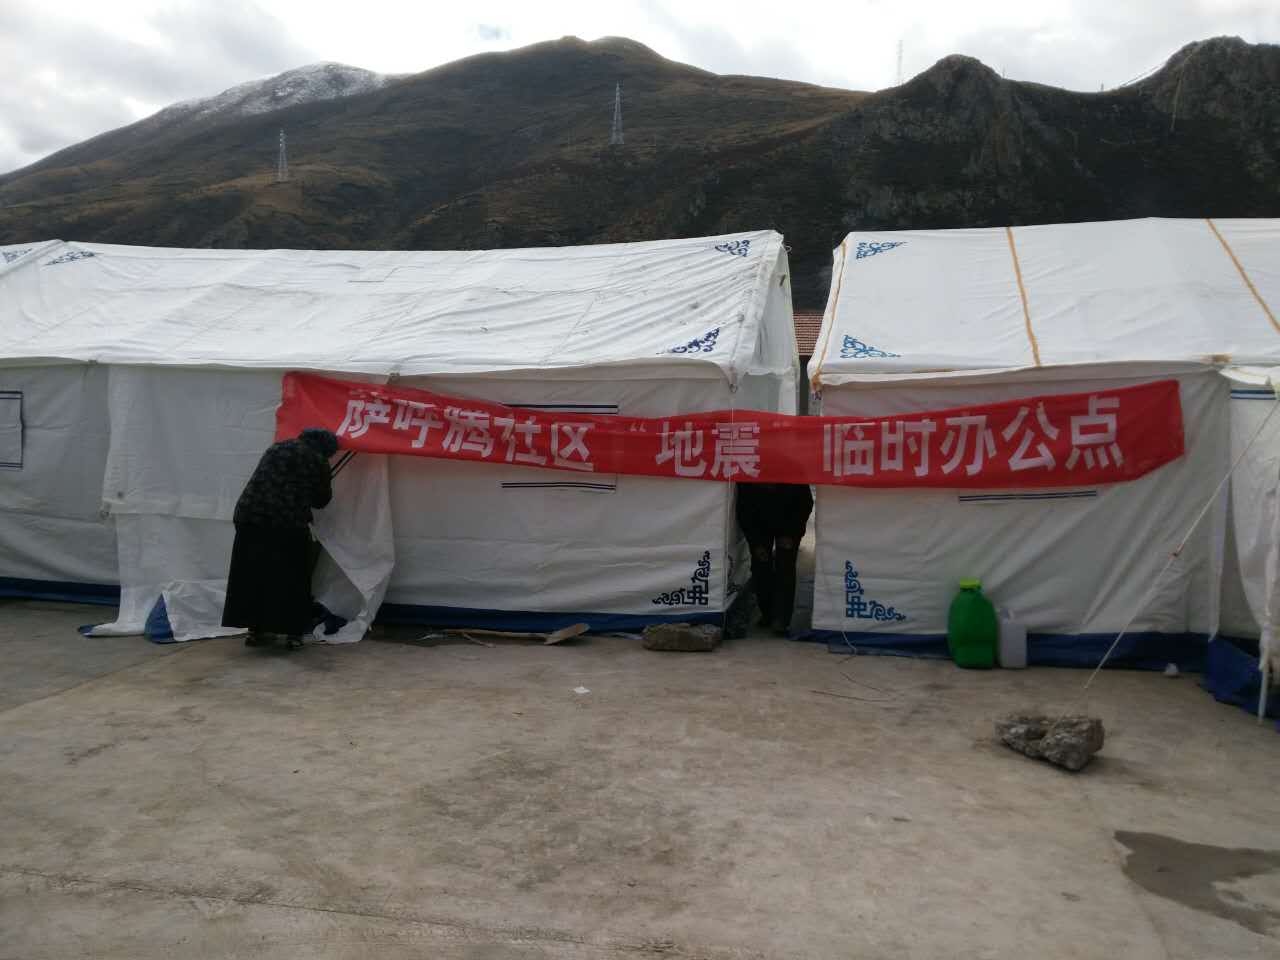 Victims live in the temporary tents 